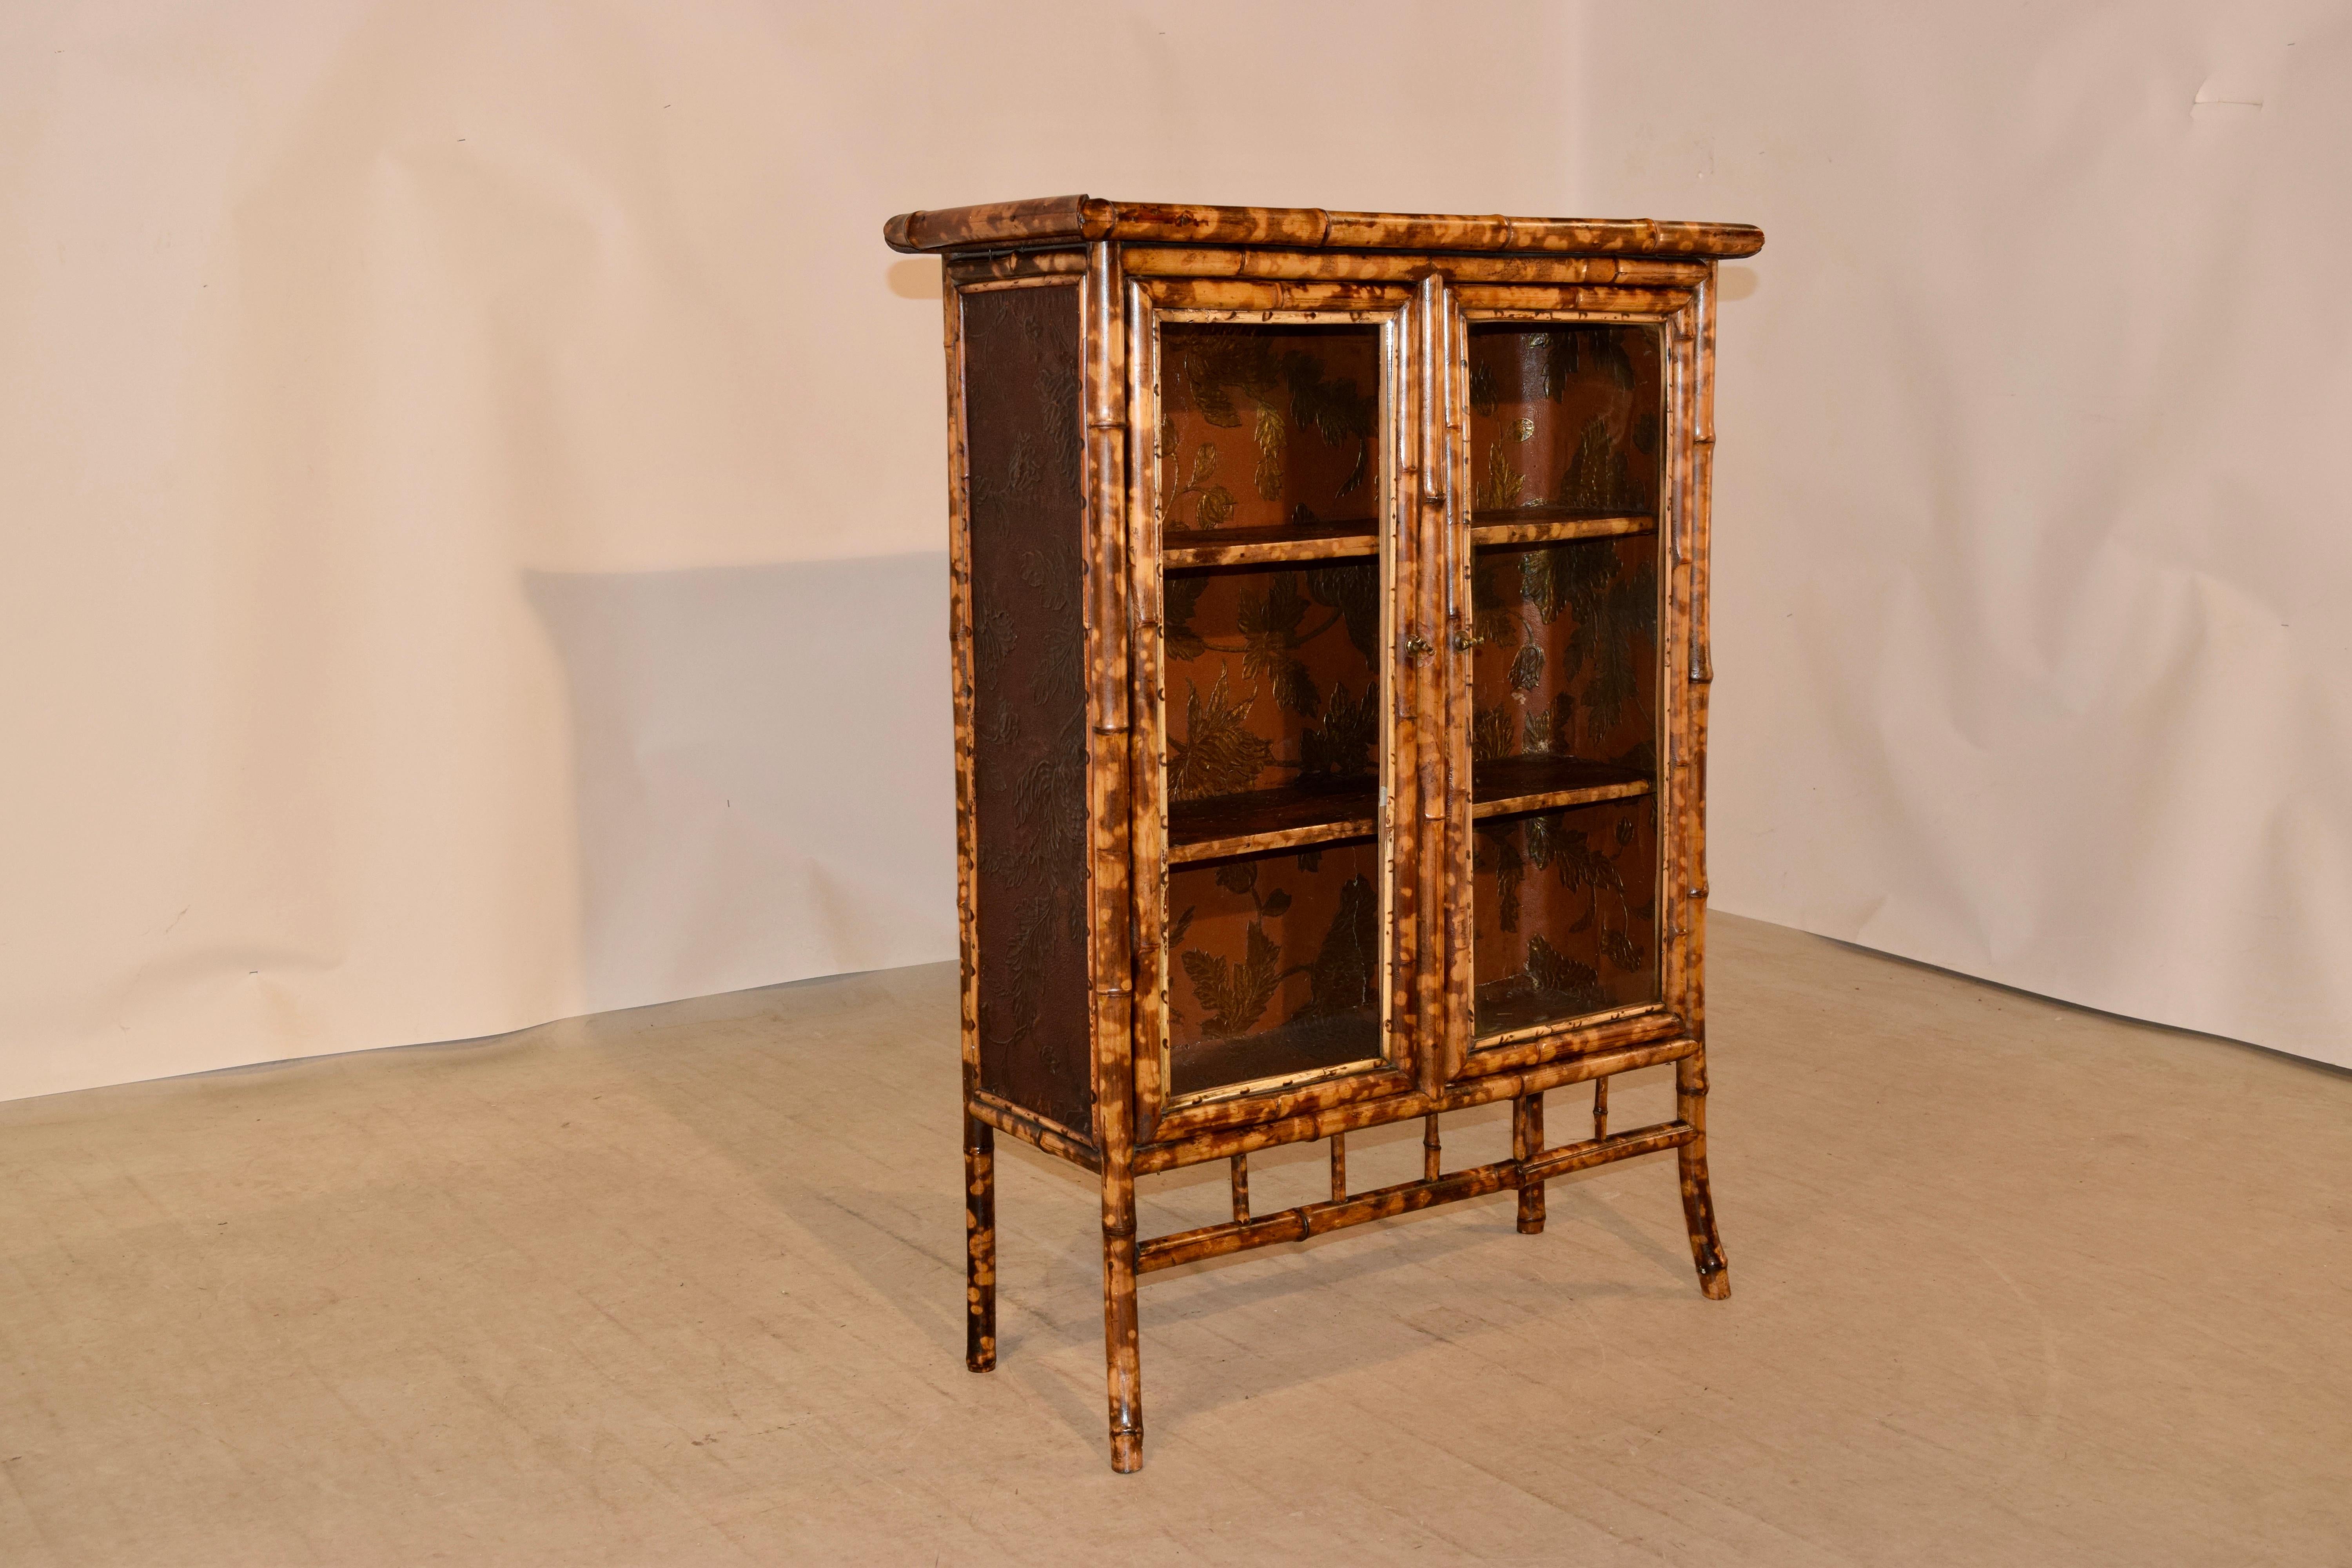 19th century French bookcase made from tortoise bamboo and pine. The top appears to be banded and have a central chinoiserie scene with a bird. This follows down to two glazed doors which open to reveal shelving. The interior is covered in antique